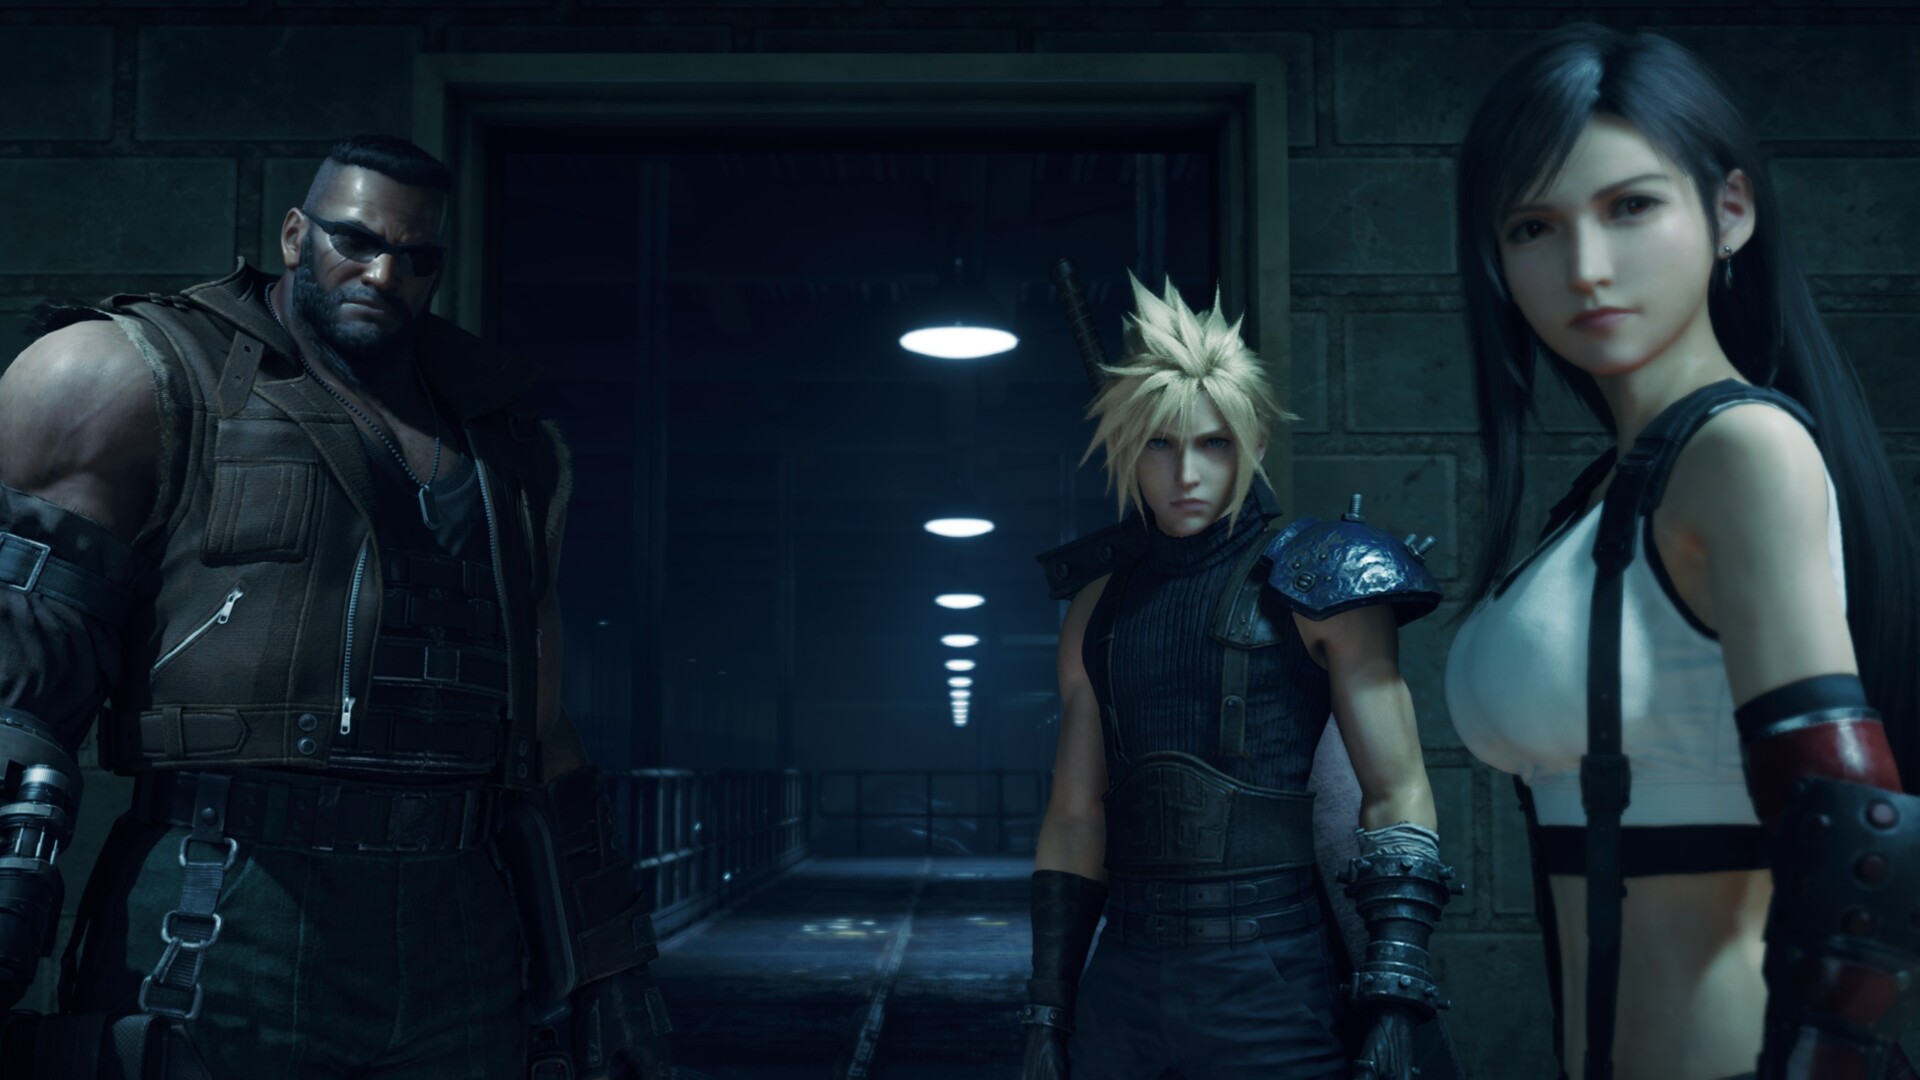 Final Fantasy Vii Remake Intergrade Launches For Steam Tomorrow Updated